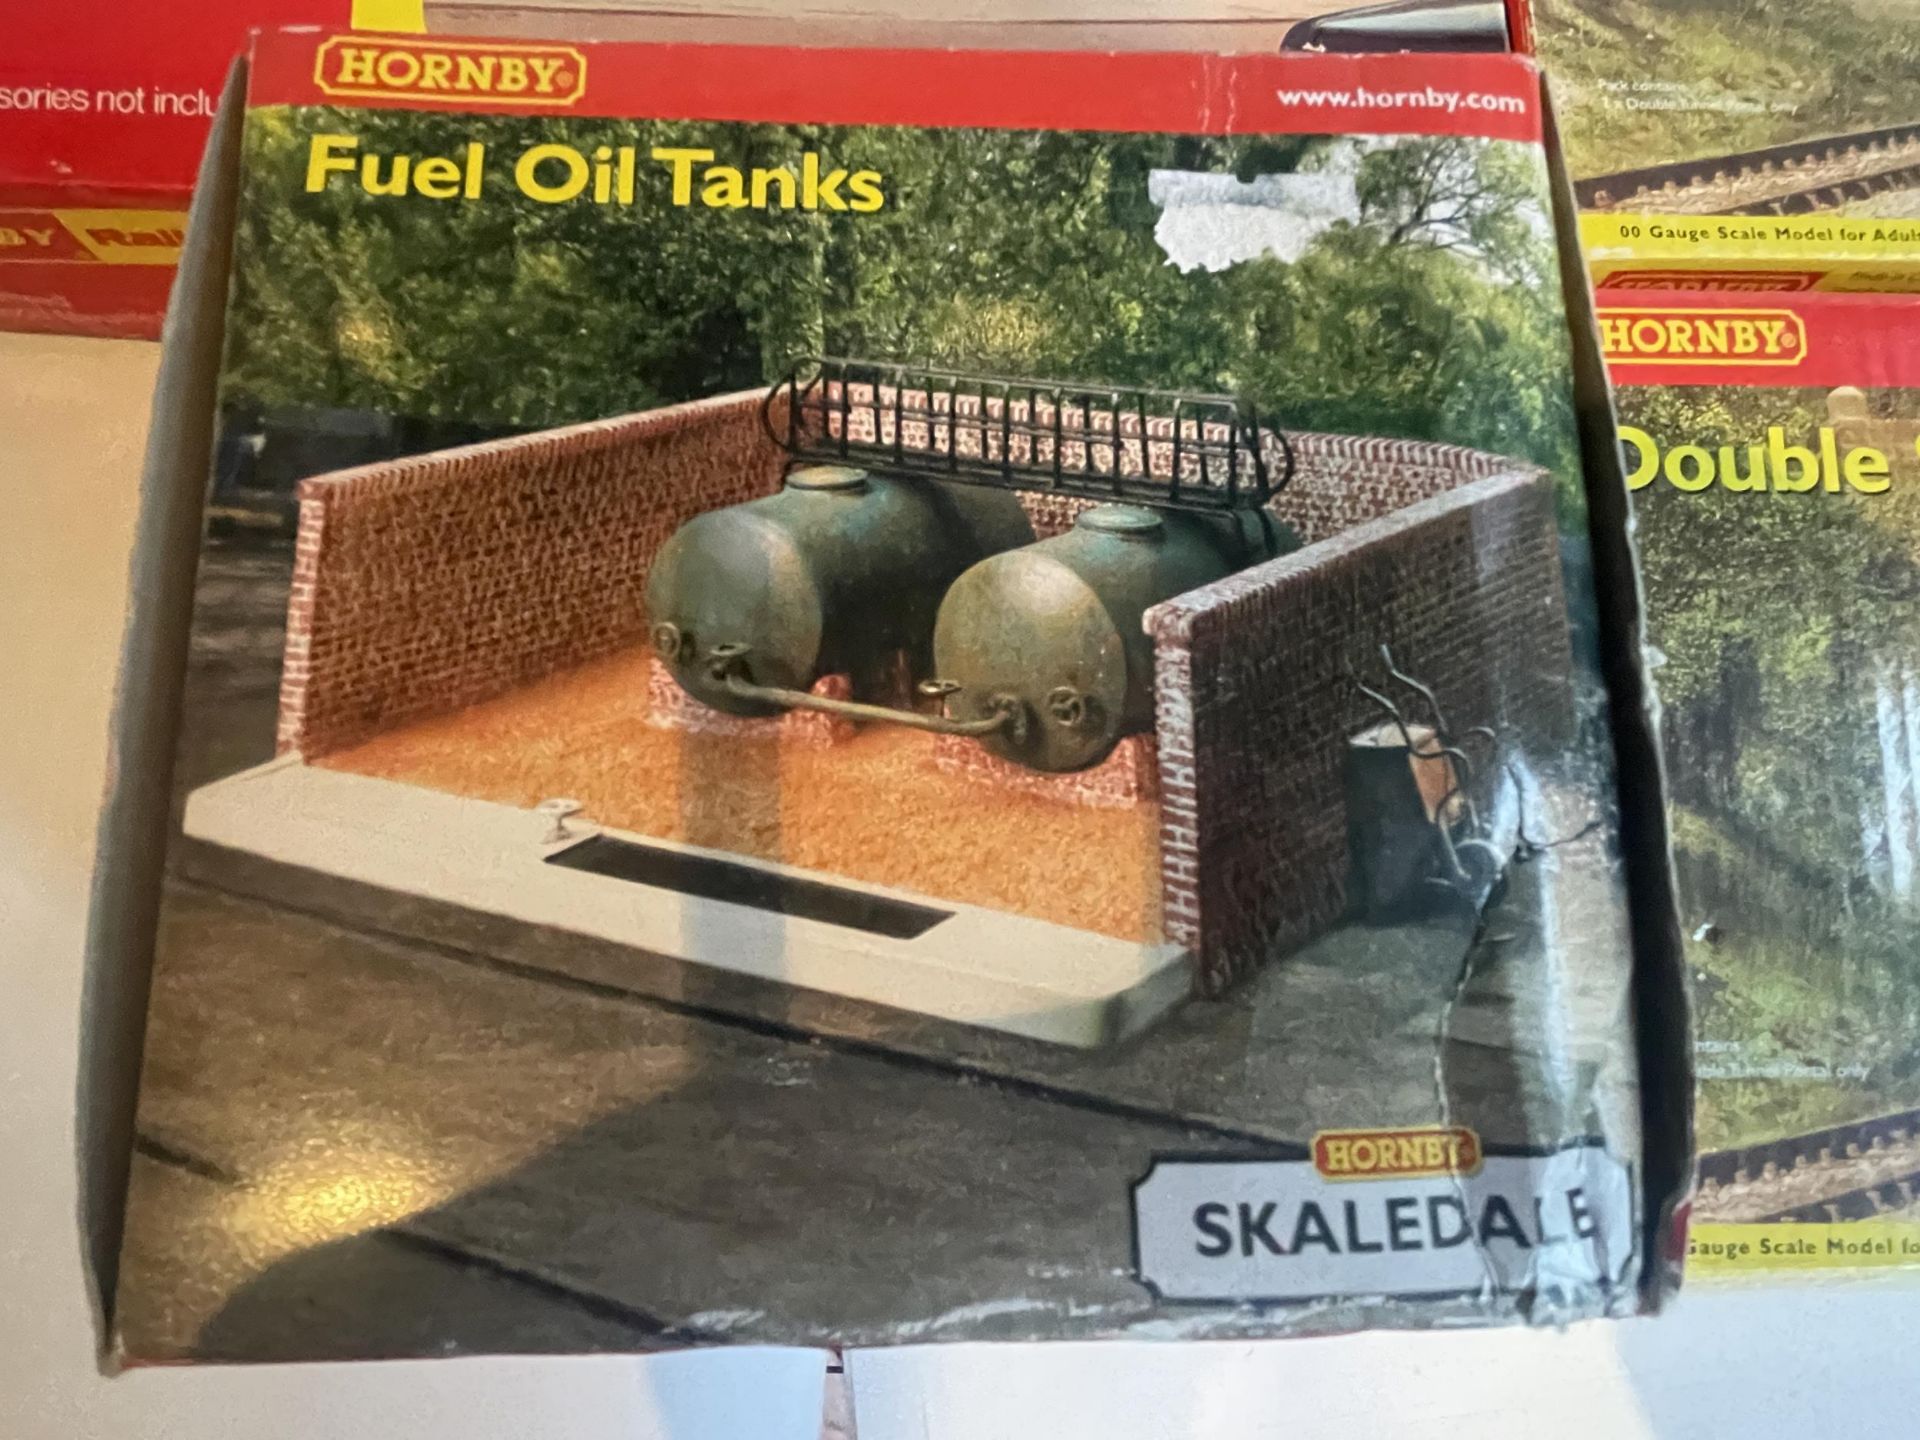 FIVE BOXED HORNBY MODELS TO INCLUDE FUEL OIL TANKS, DOUBLE STONE TUNNEL PORTALS, A DIESEL - Image 4 of 5